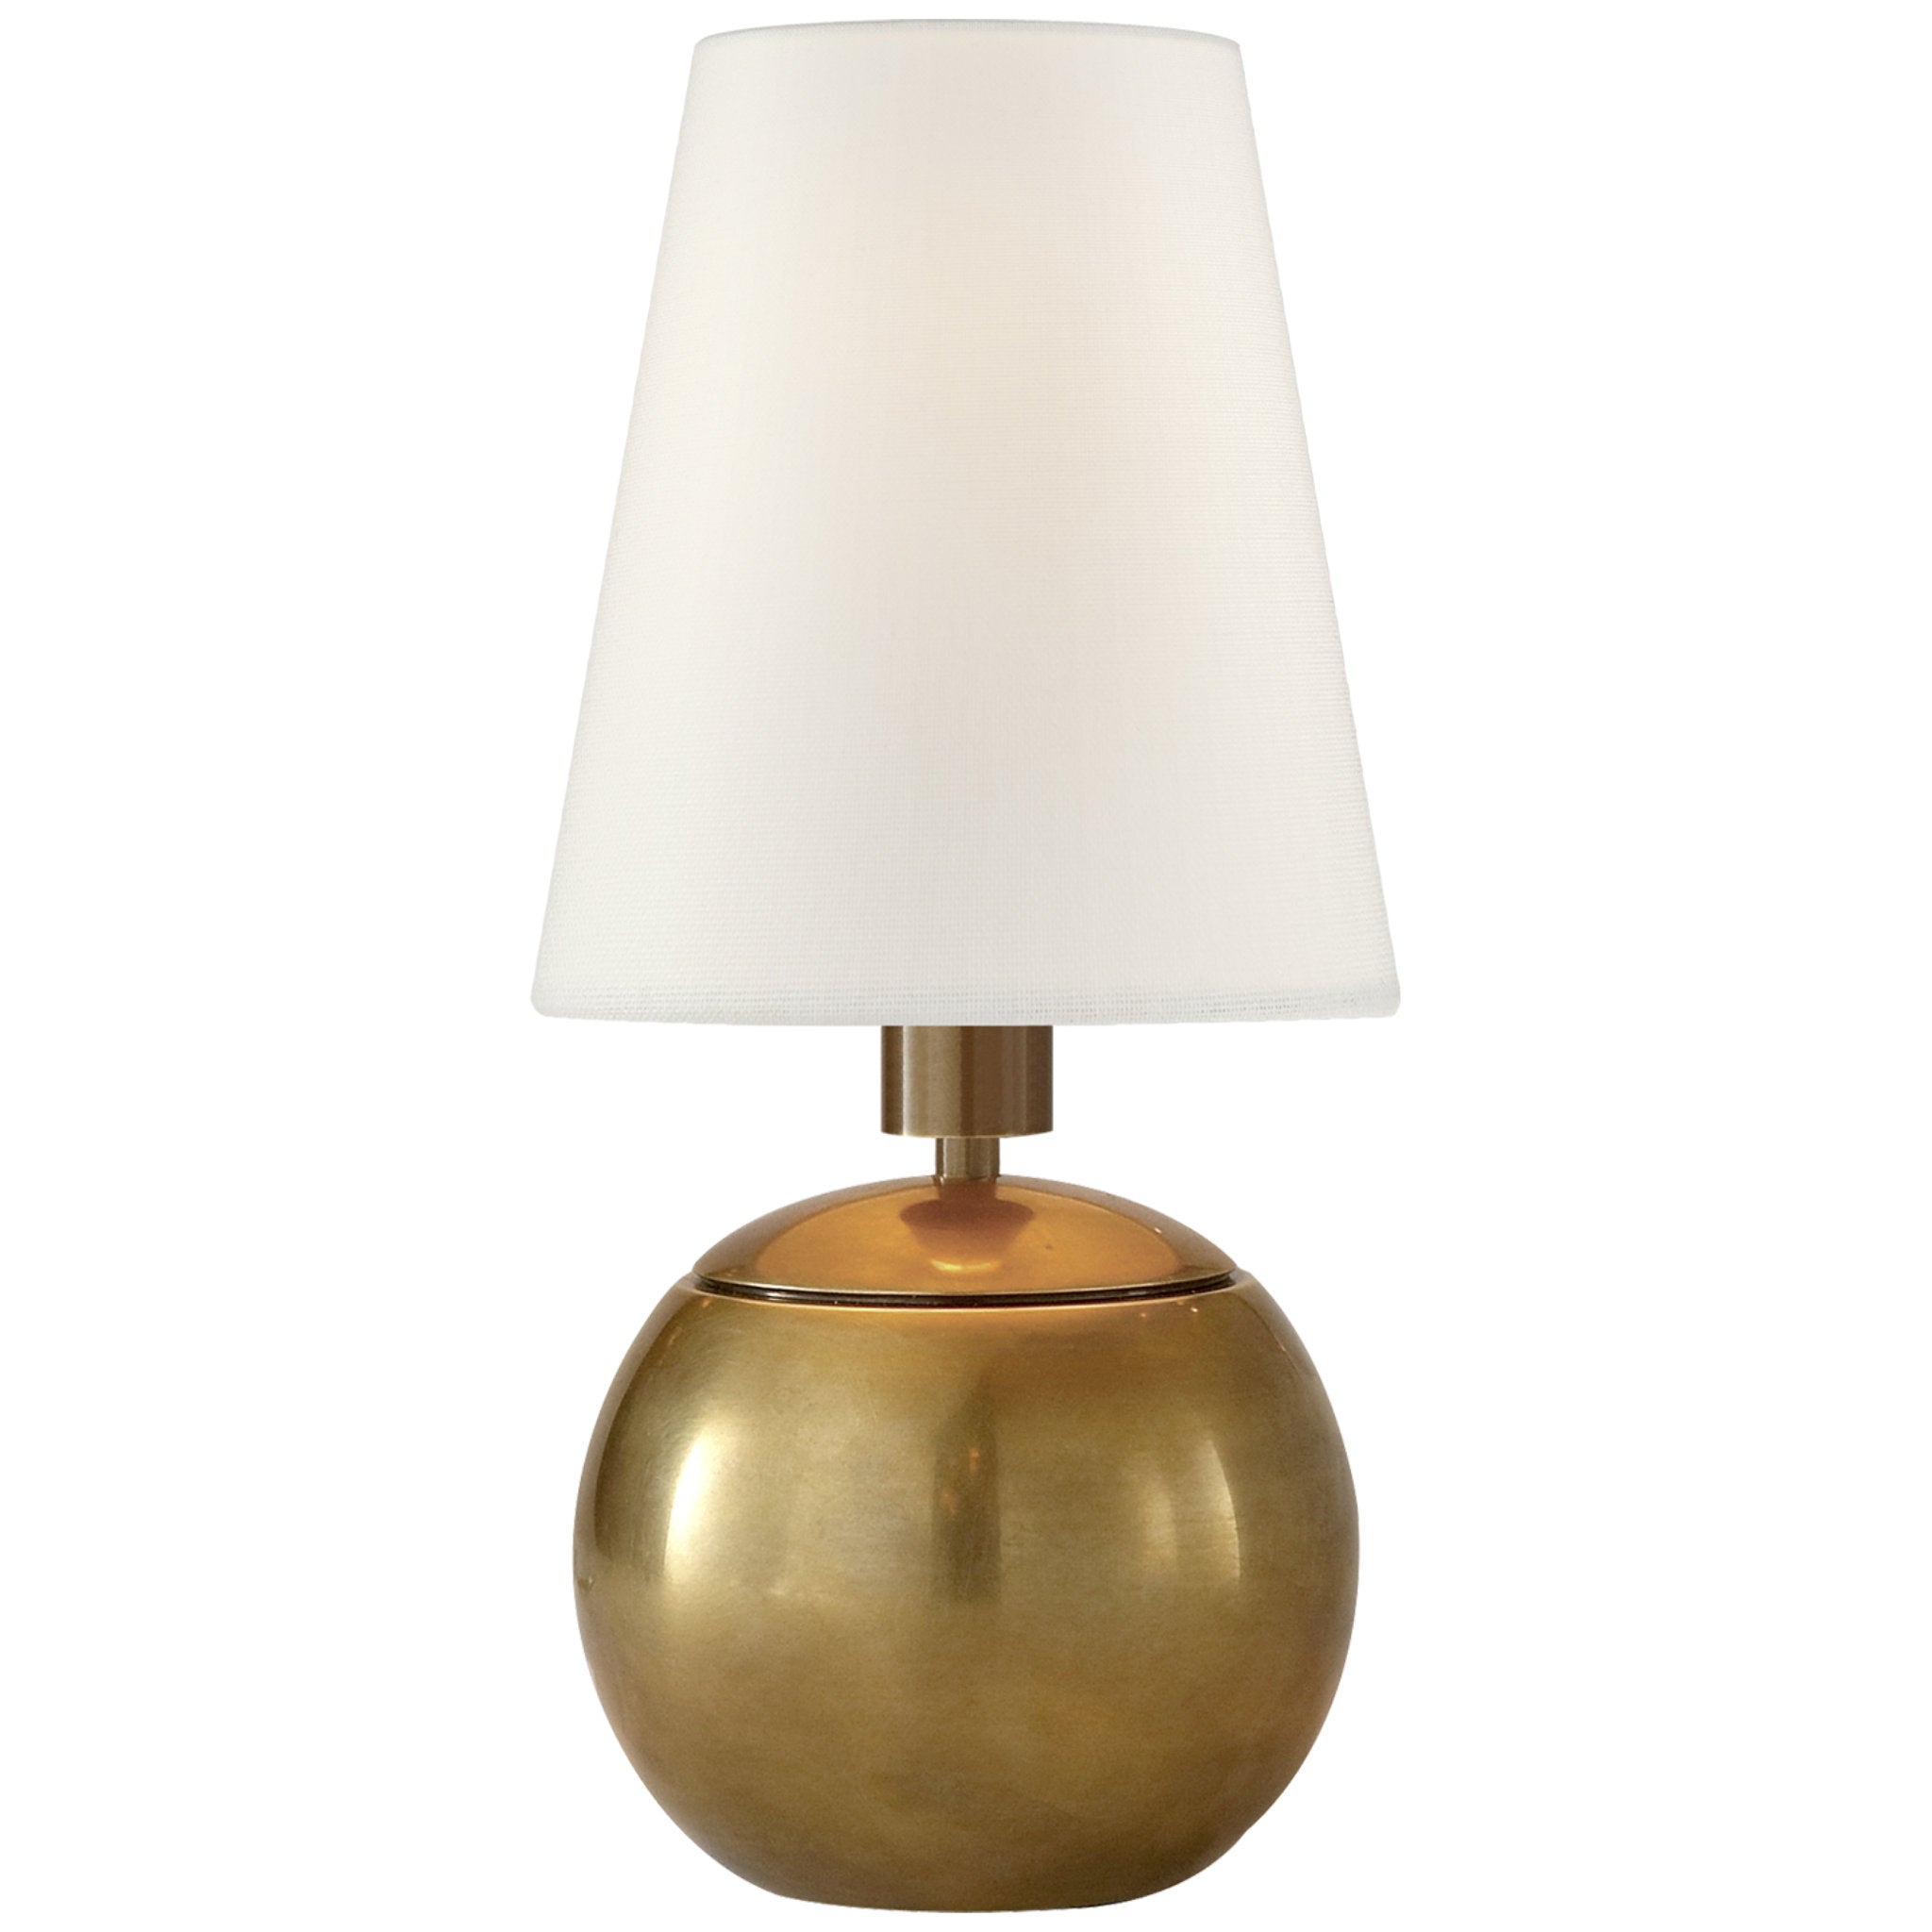 Thomas O'Brien Tiny Terri Round Accent Lamp in Hand-Rubbed Antique Brass with Linen Shade